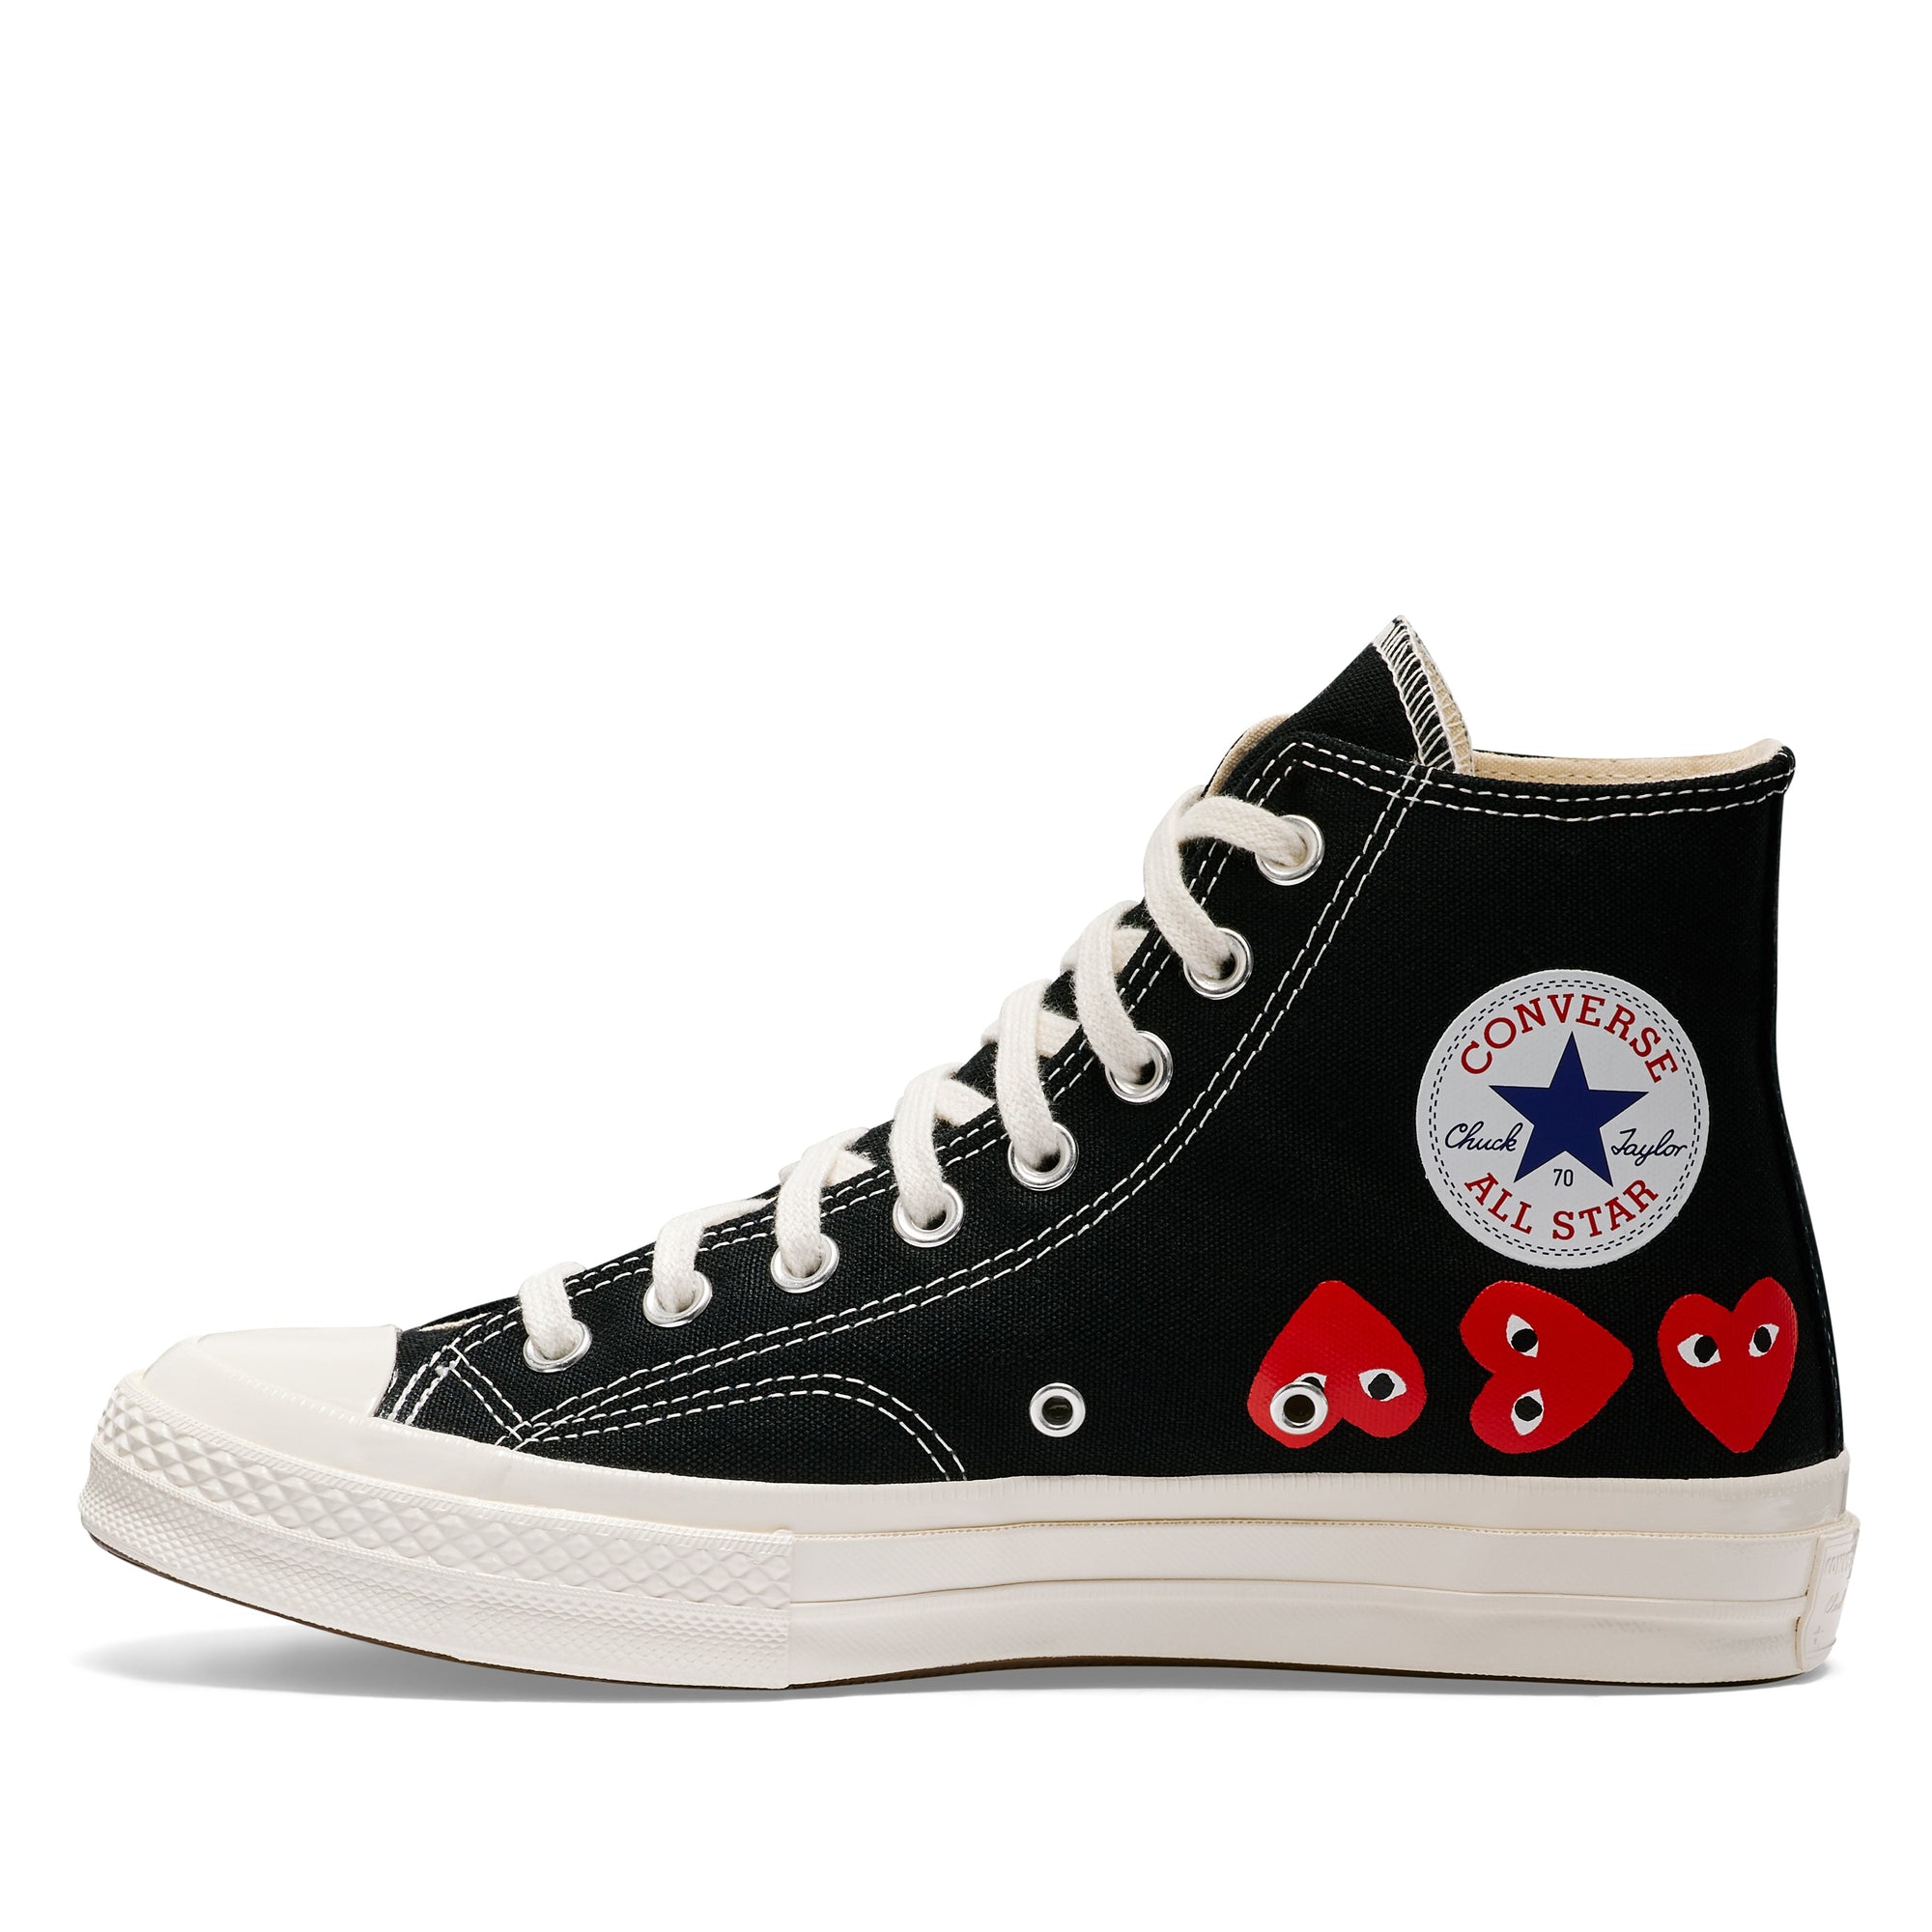 Play Converse - Multi Red Heart Chuck Taylor All Star '70 High Sneakers - (Black) view 2